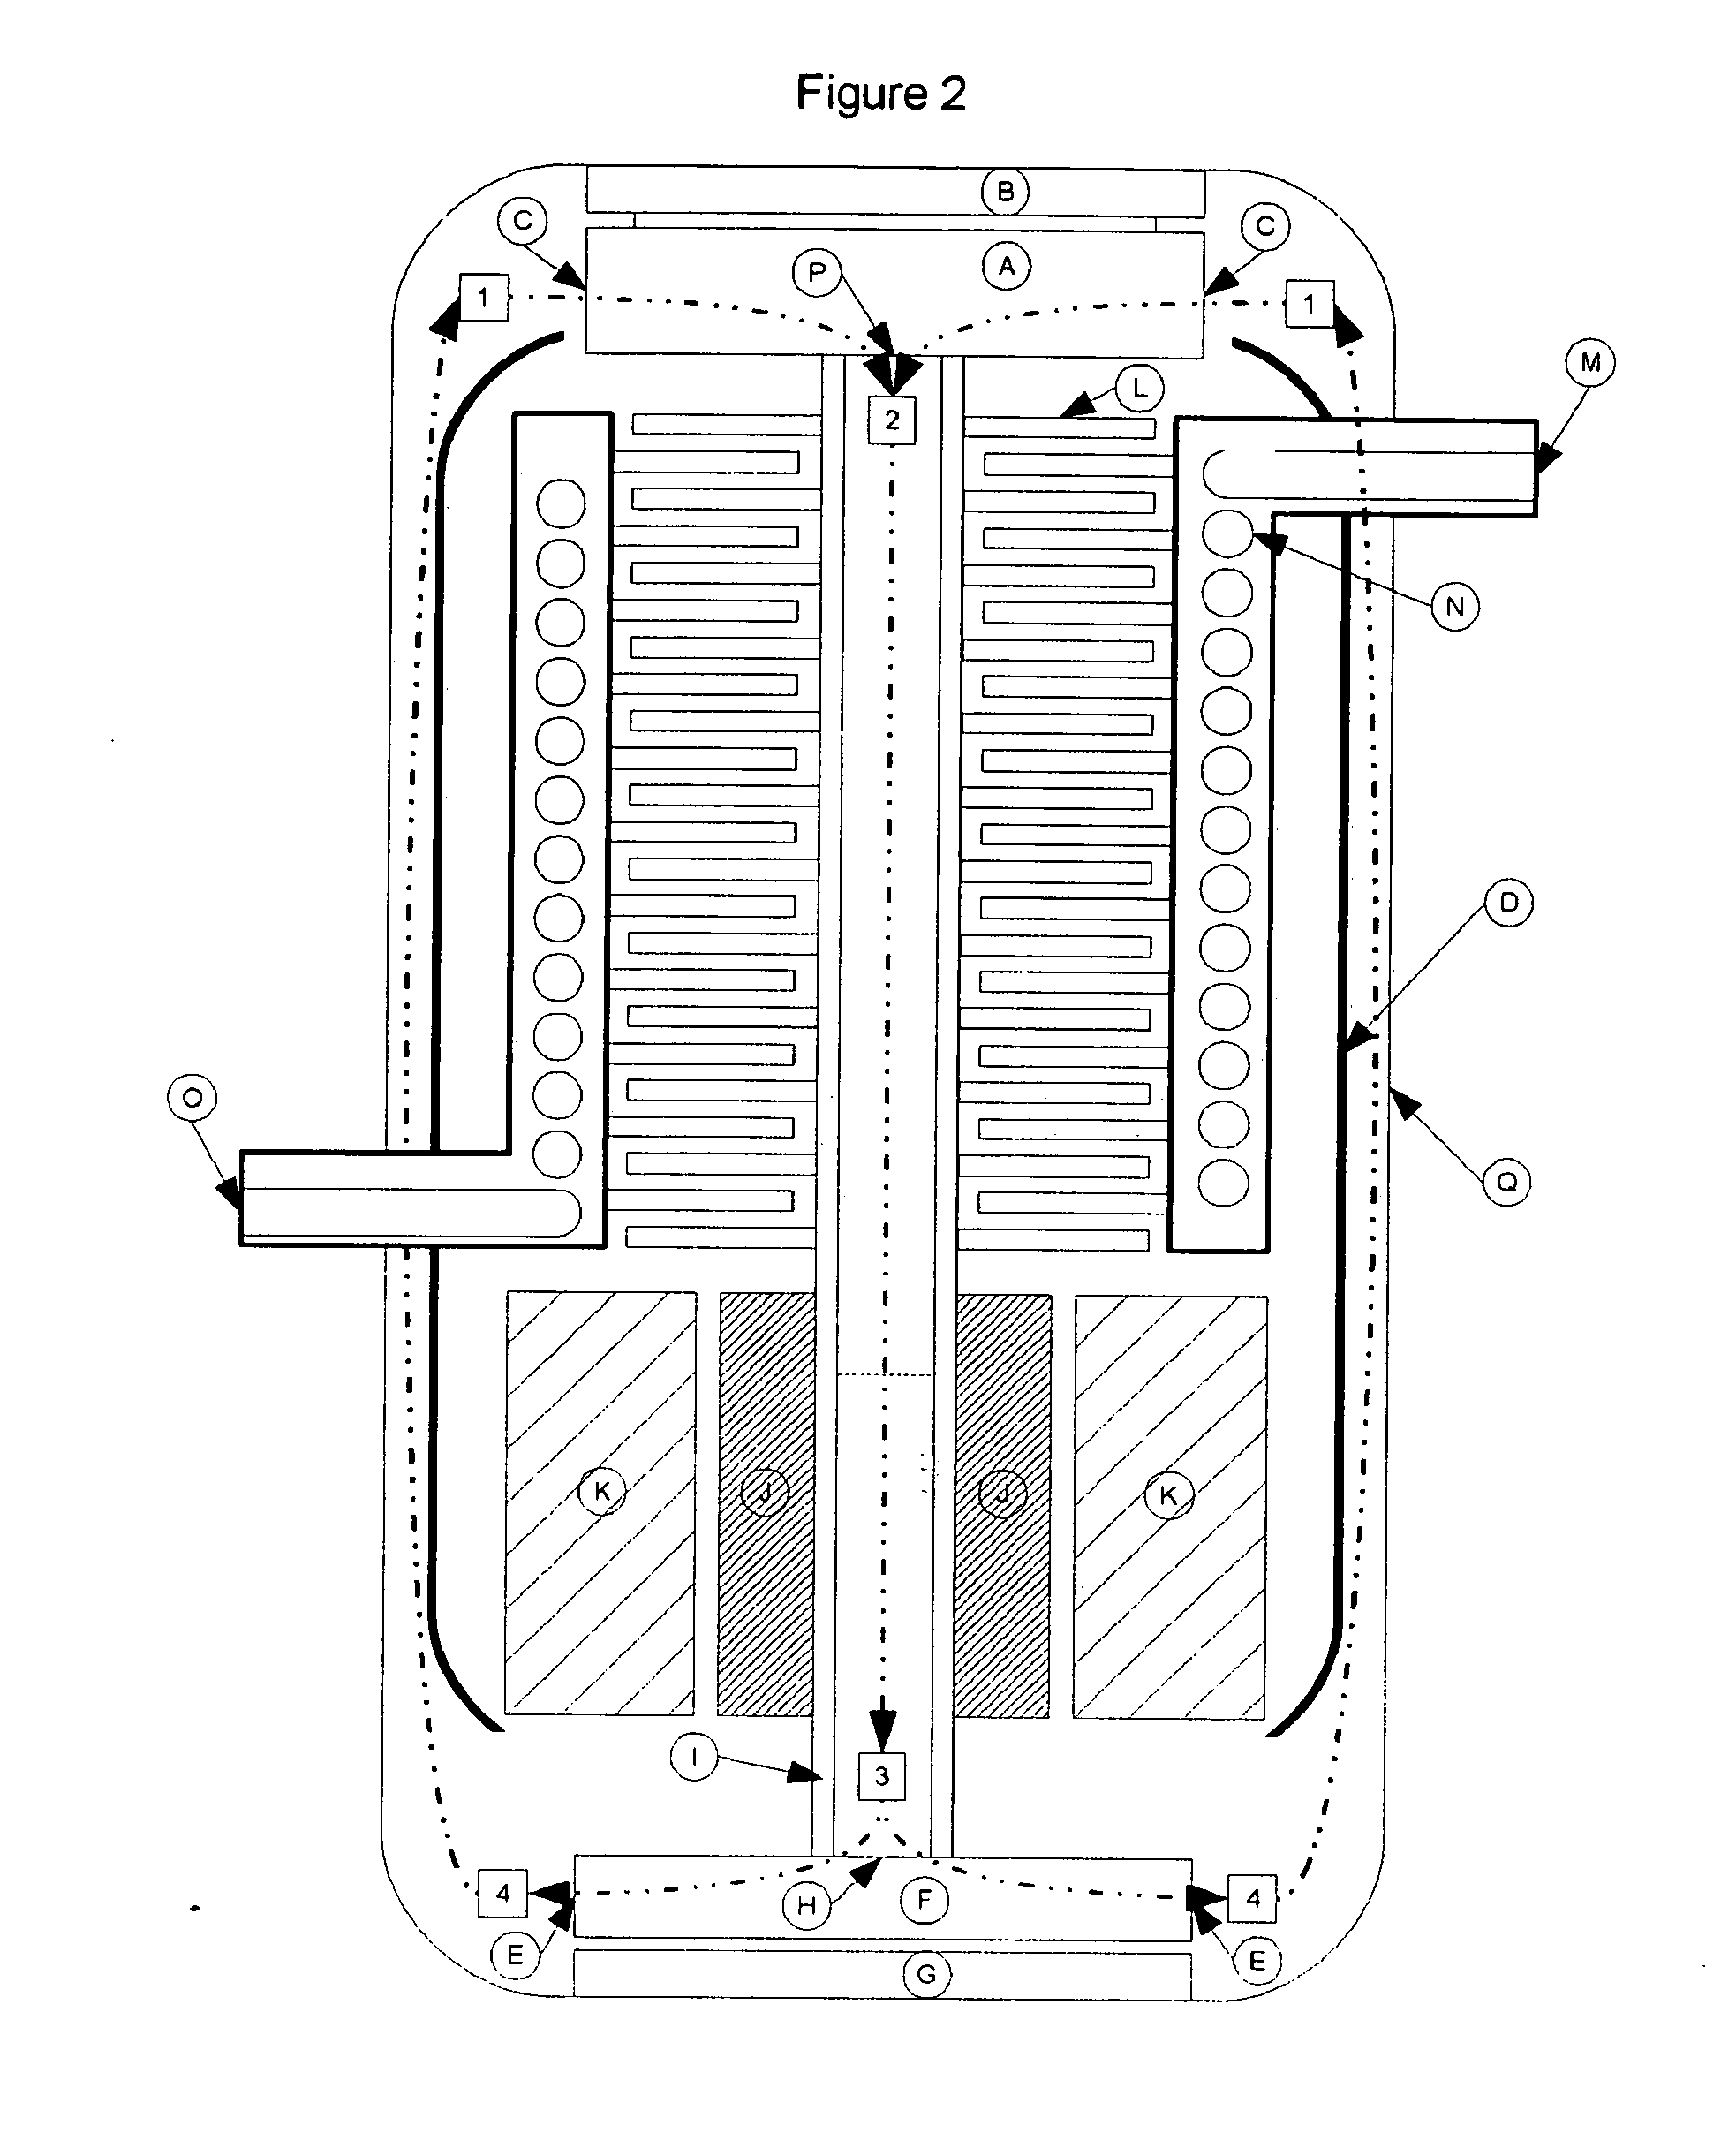 Compact energy cycle construction utilizing some combination of a scroll type expander, pump, and compressor for operating according to a rankine, an organic rankine, heat pump, or combined organic rankine and heat pump cycle